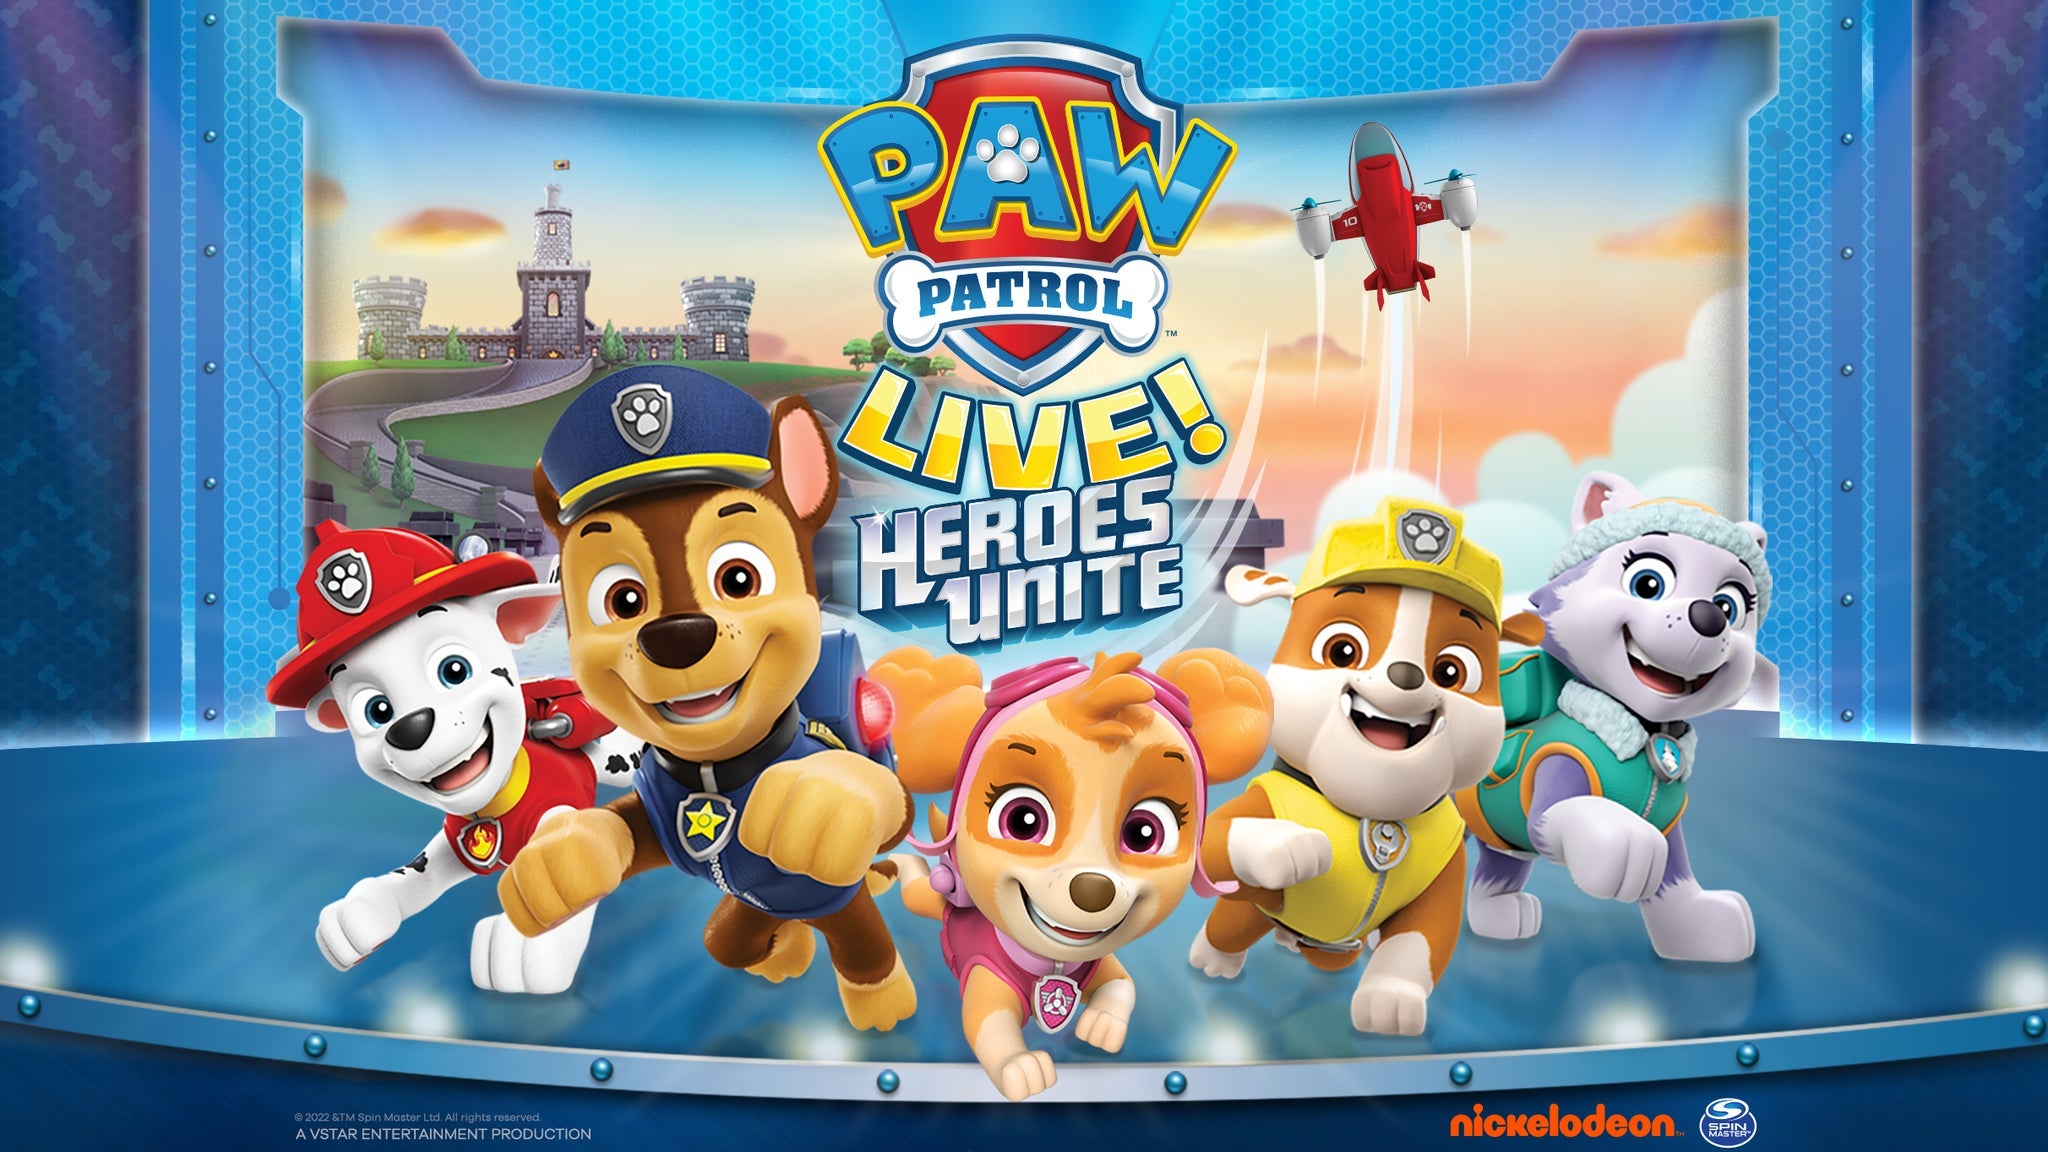 PAW Patrol Live!: Heroes Unite pre-sale password for advance tickets in Toronto